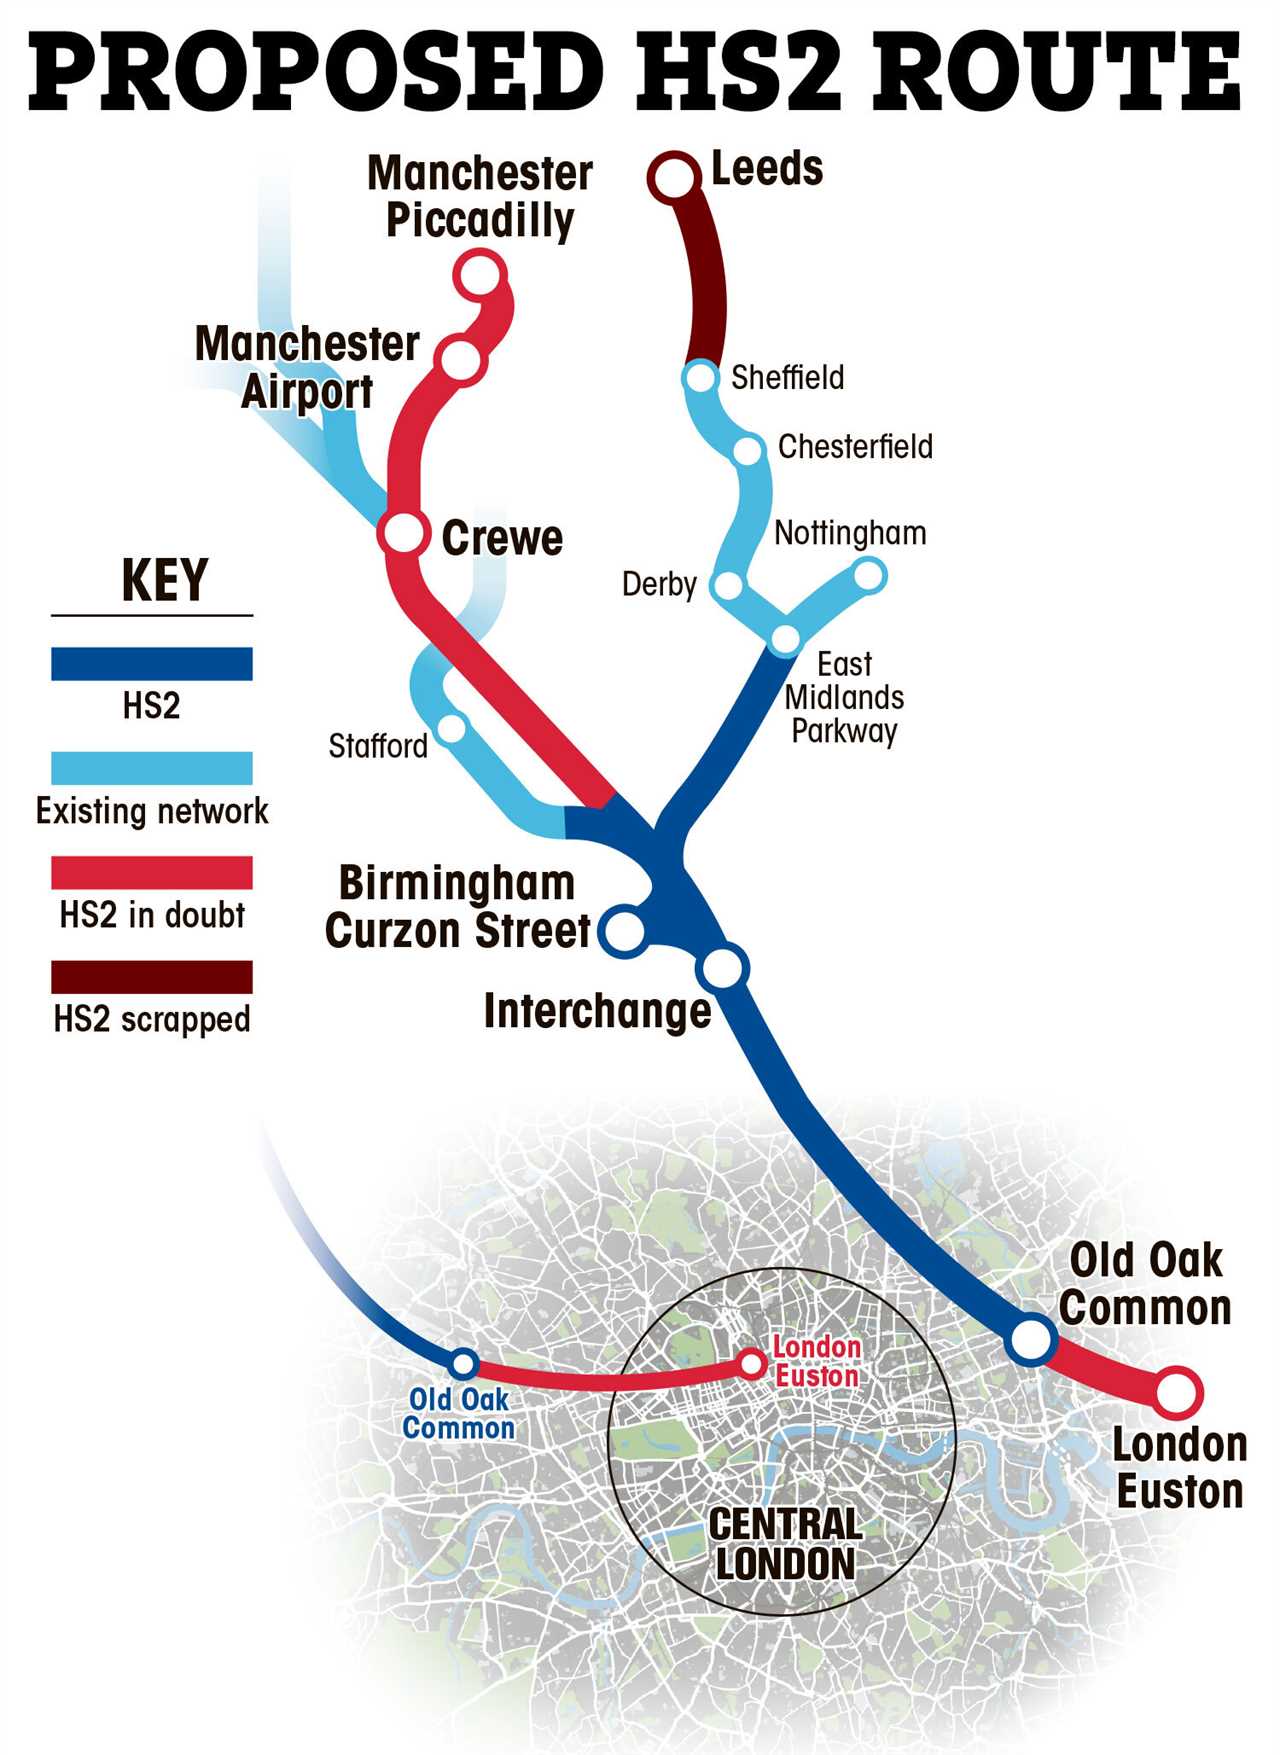 Fresh blow for HS2 as Manchester leg could be scrapped, No10 hints